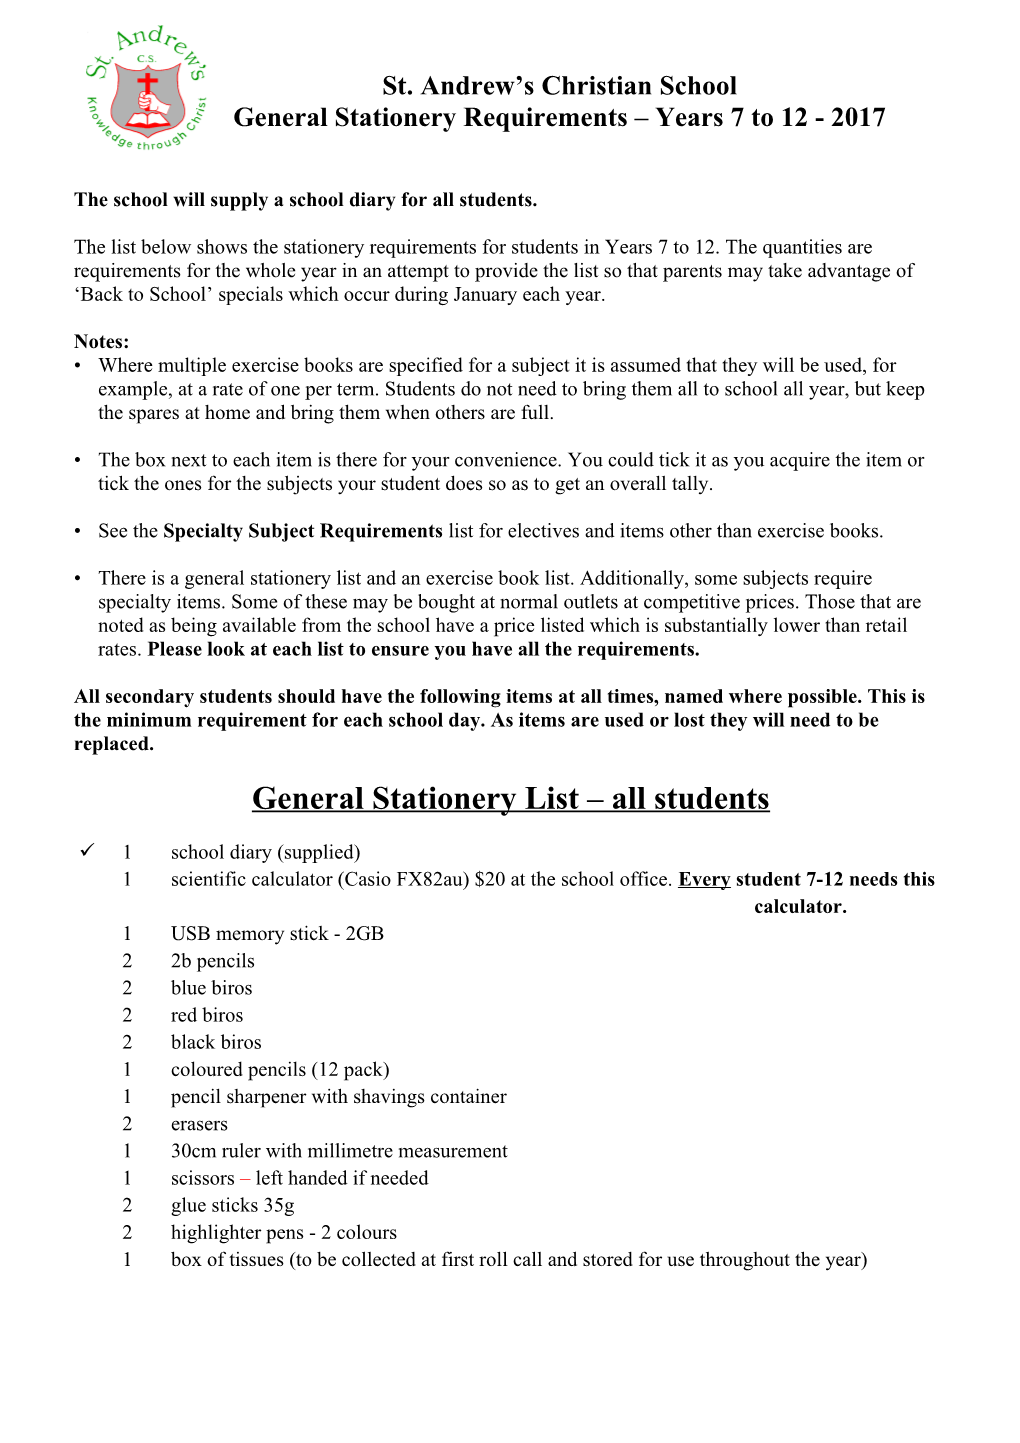 General Stationary Requirements Years 7 to 12